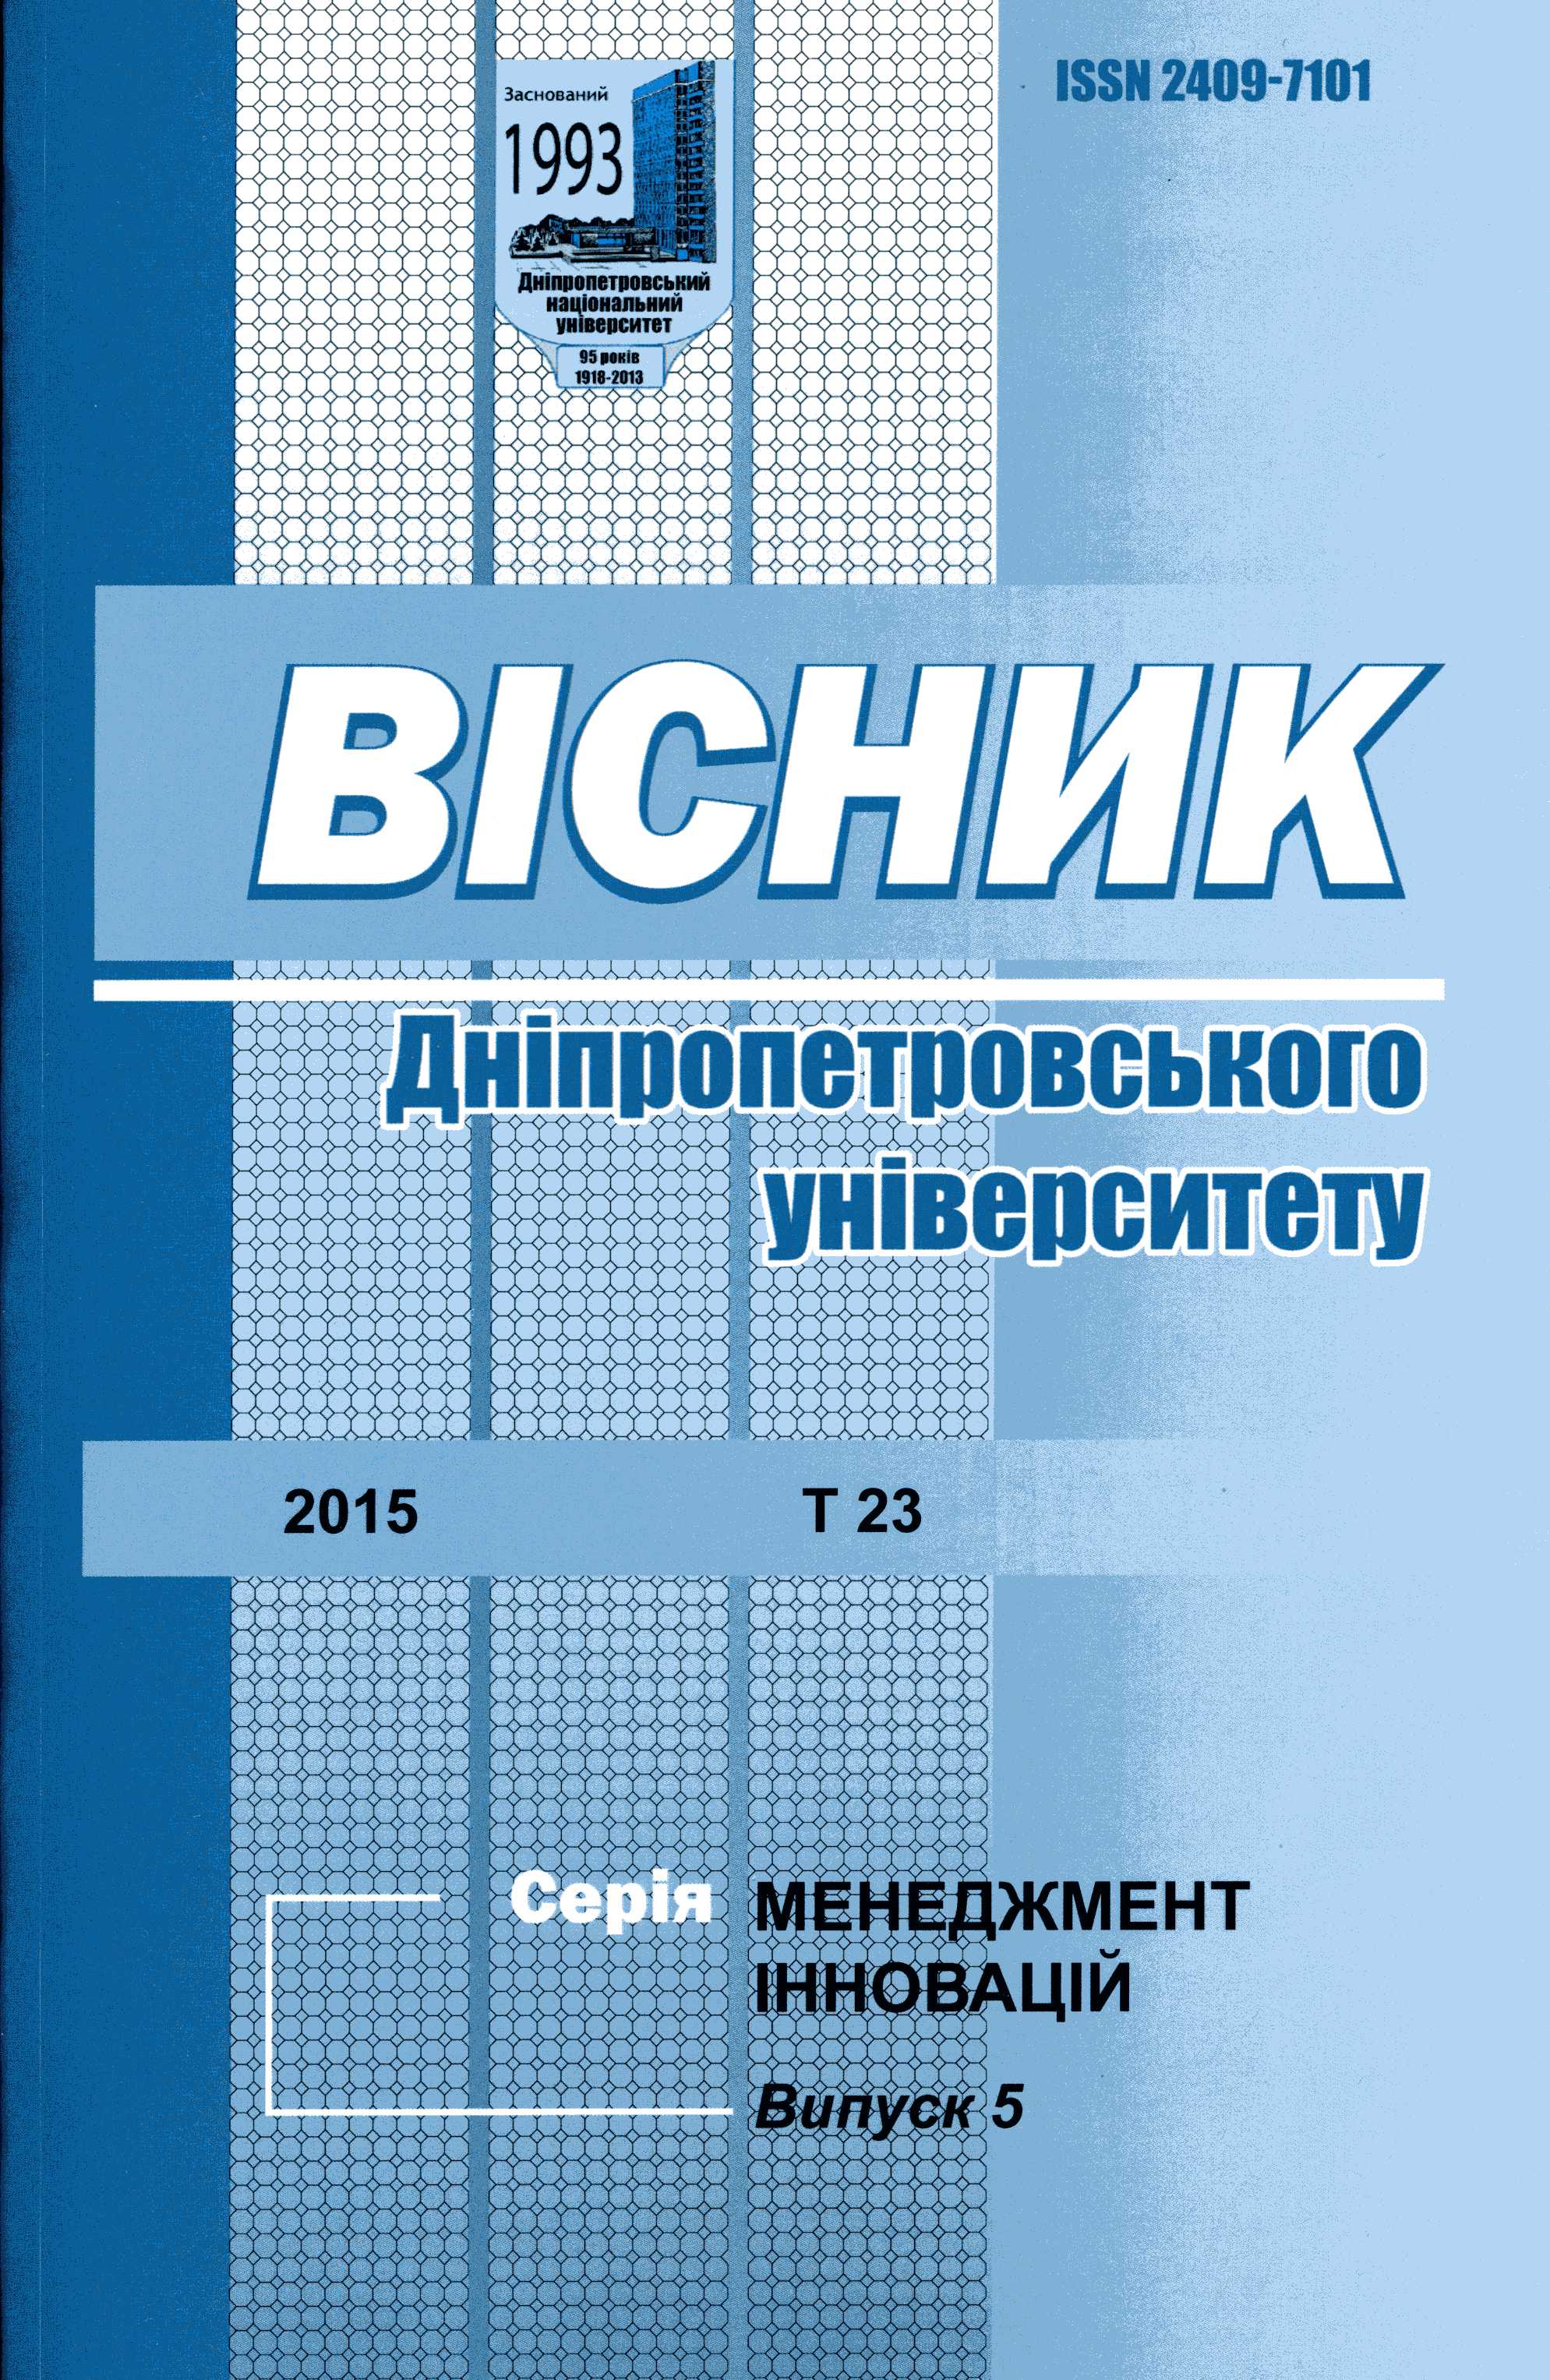 Problems of Reforming the Law Enforcement System of the State: An Innovative Method of Motivation of Staff Cover Image